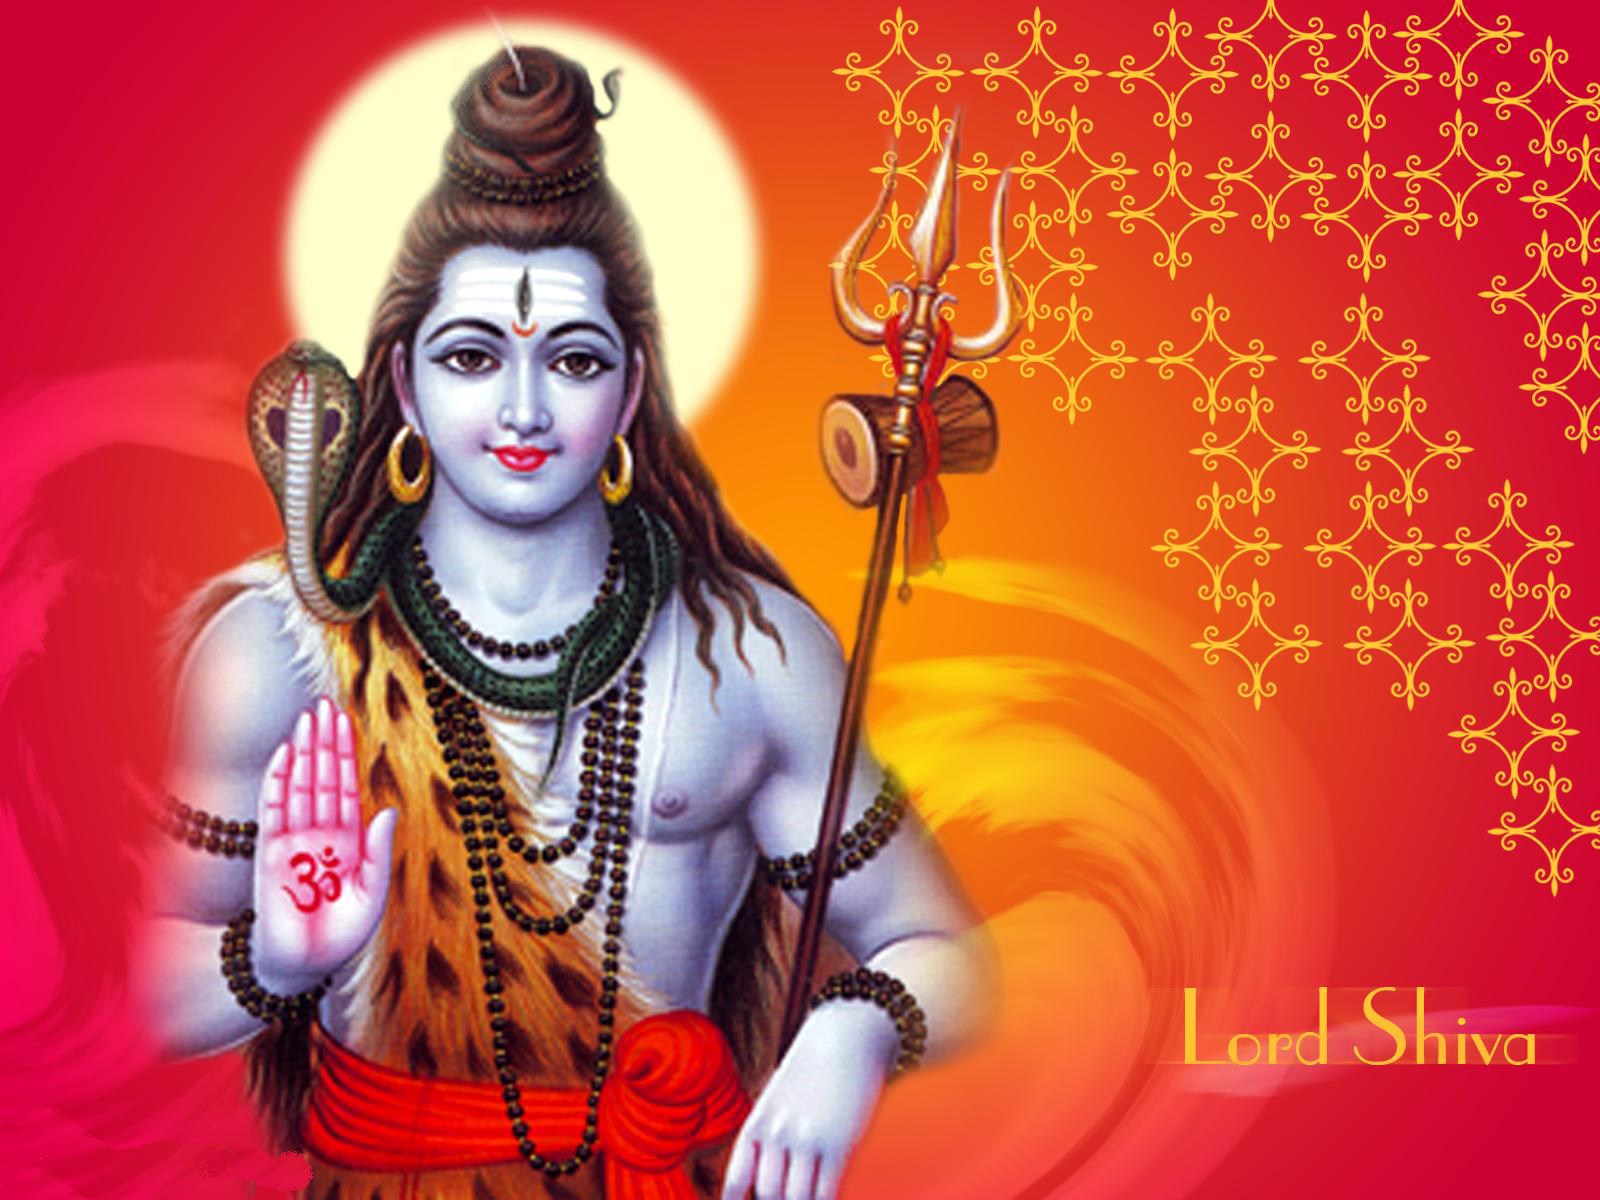 Download Free HD Wallpapers,Photos & Images of Lord Shiv Shankar - 2 |  